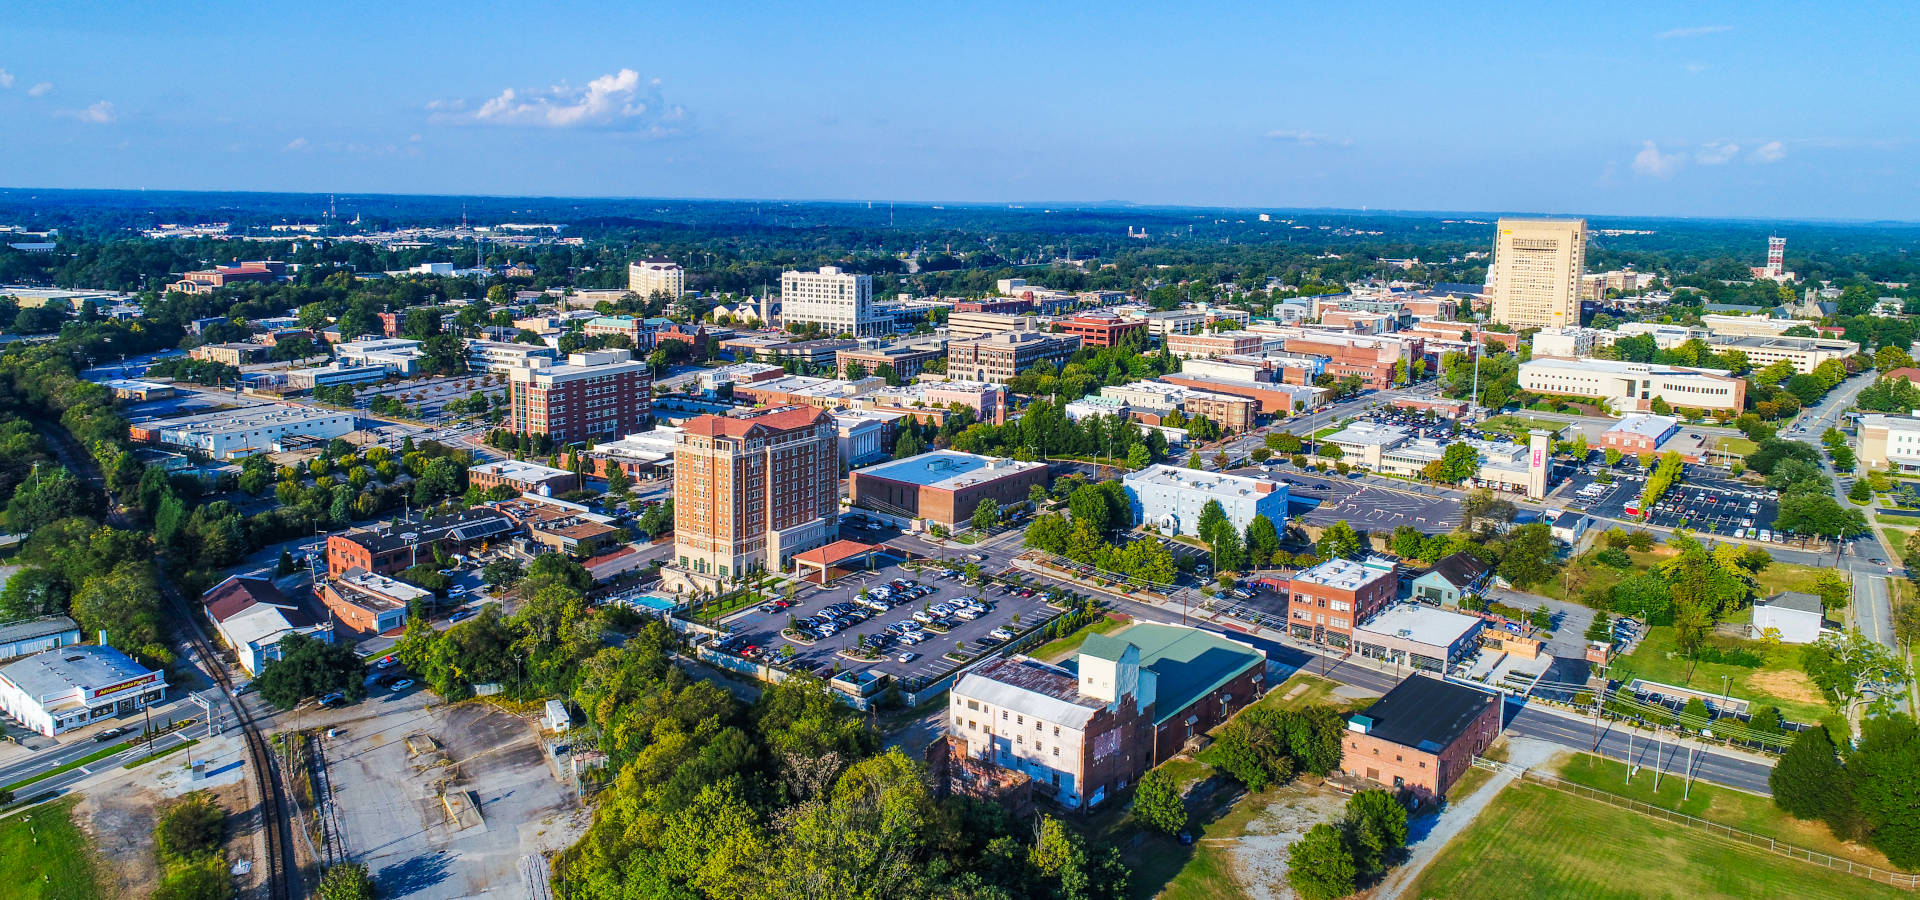 Drone aerial photo of the City of Spartanburg